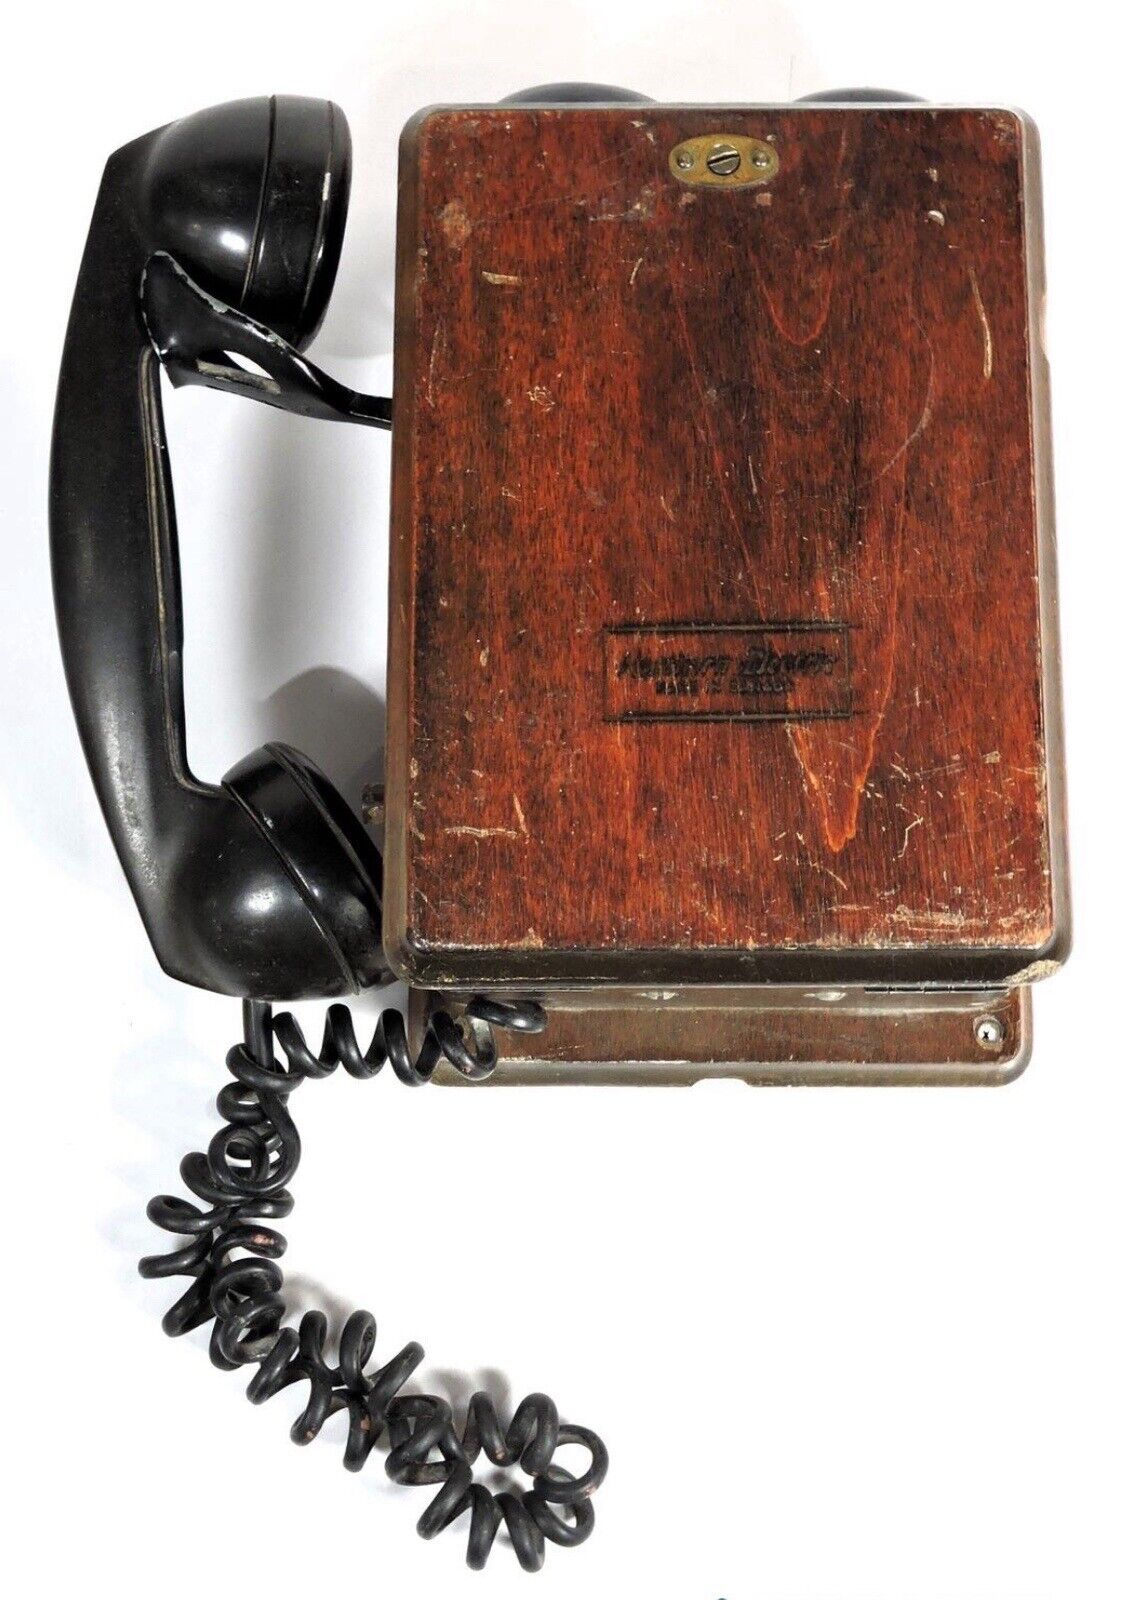 Vintage-Northern Electric Crank Phone 717  N717CG Wooden Wall Telephone -1940 ‘s